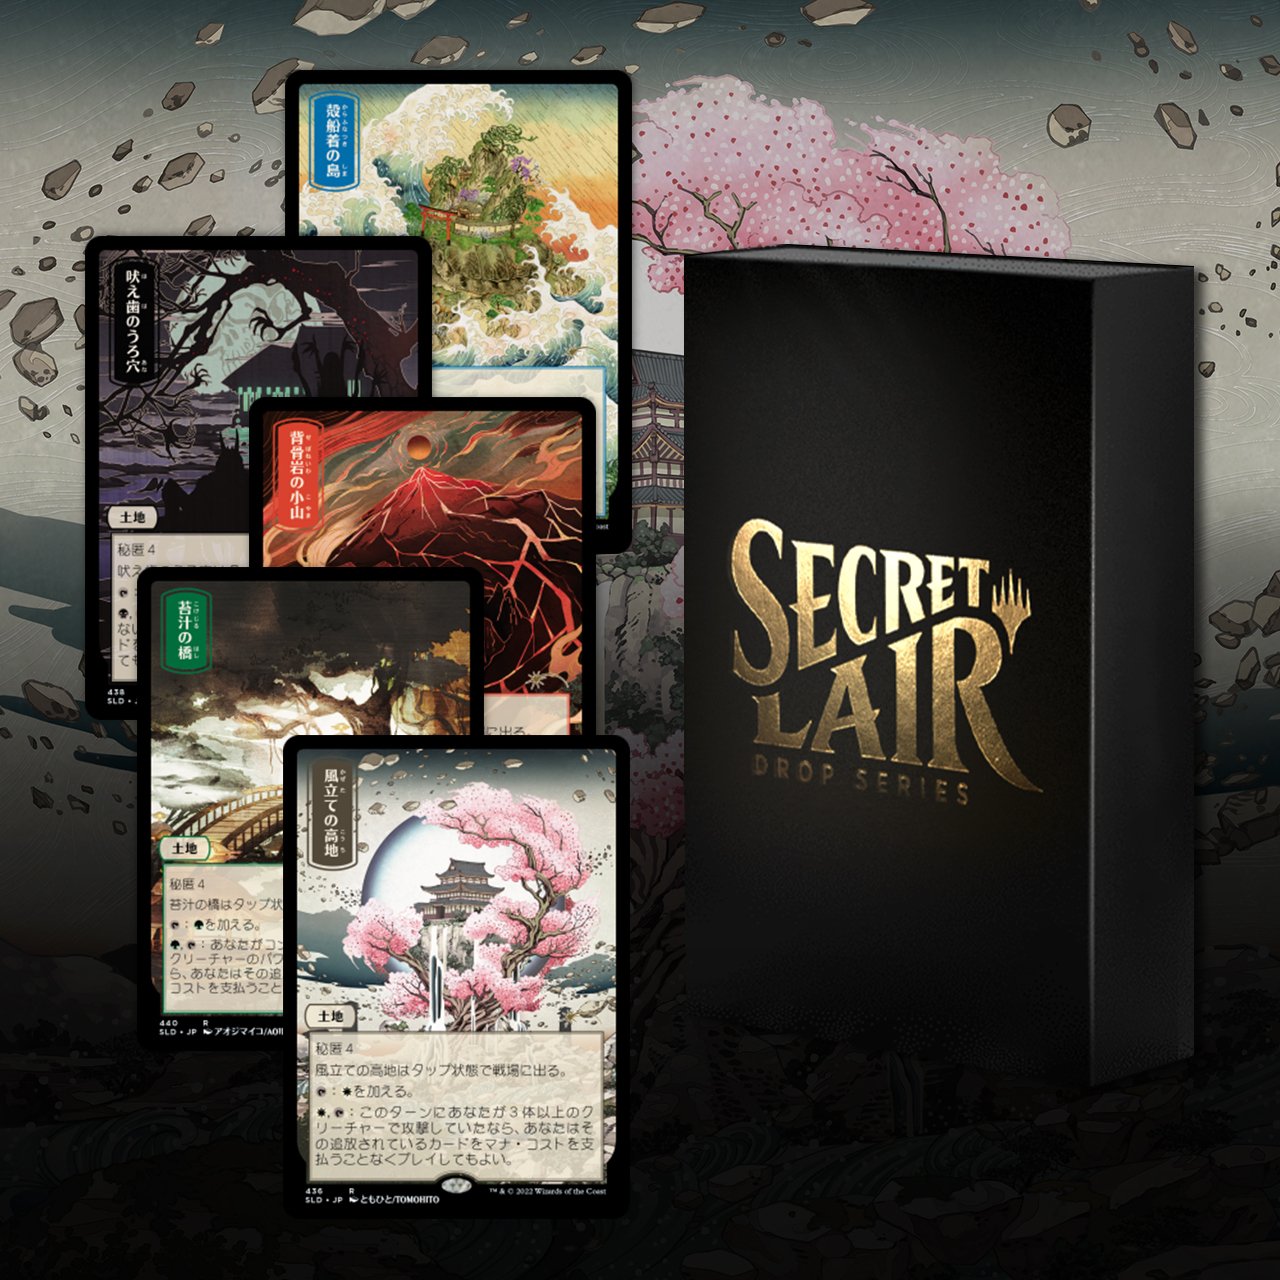 Secret Lair Drop Series: February Superdrop 2022: Pictures of the